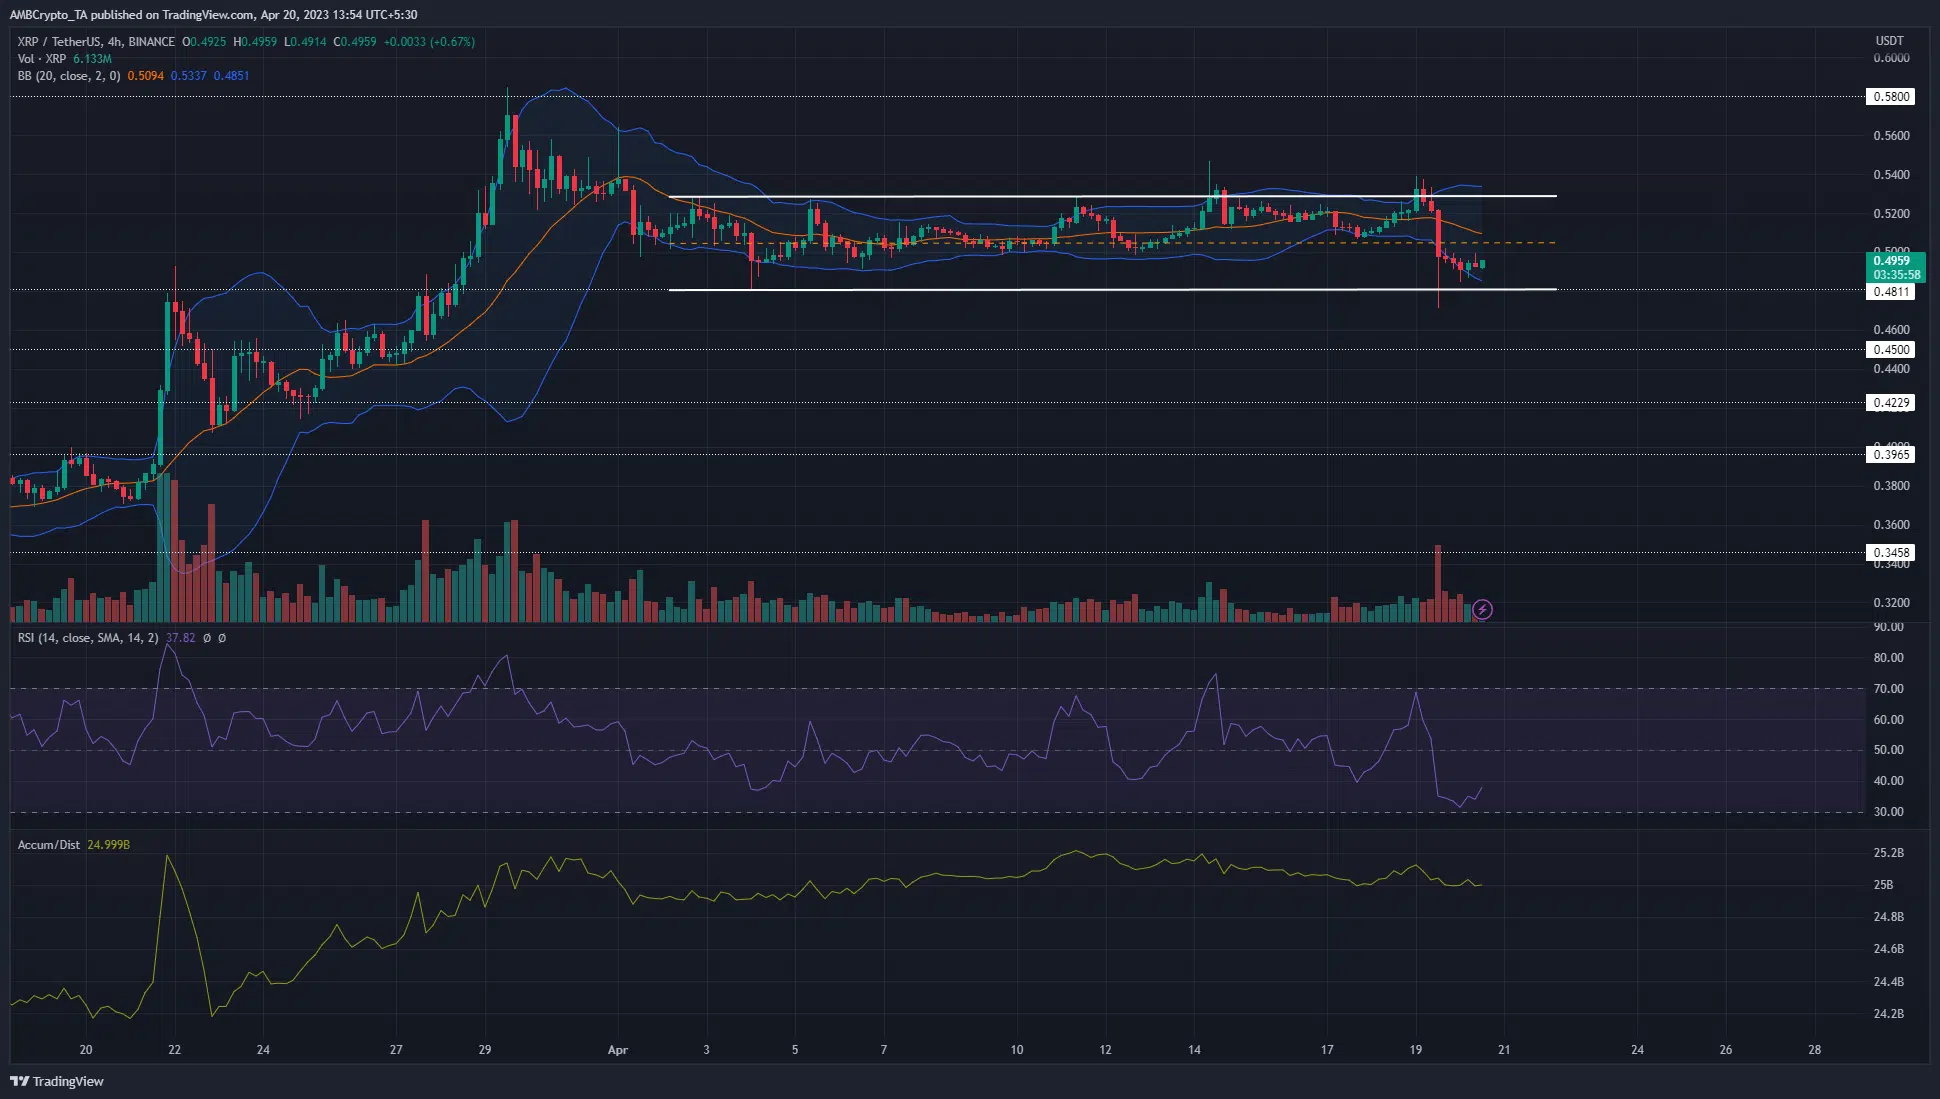 XRP sellers enjoy the bearish vista as selling wave could force prices lower